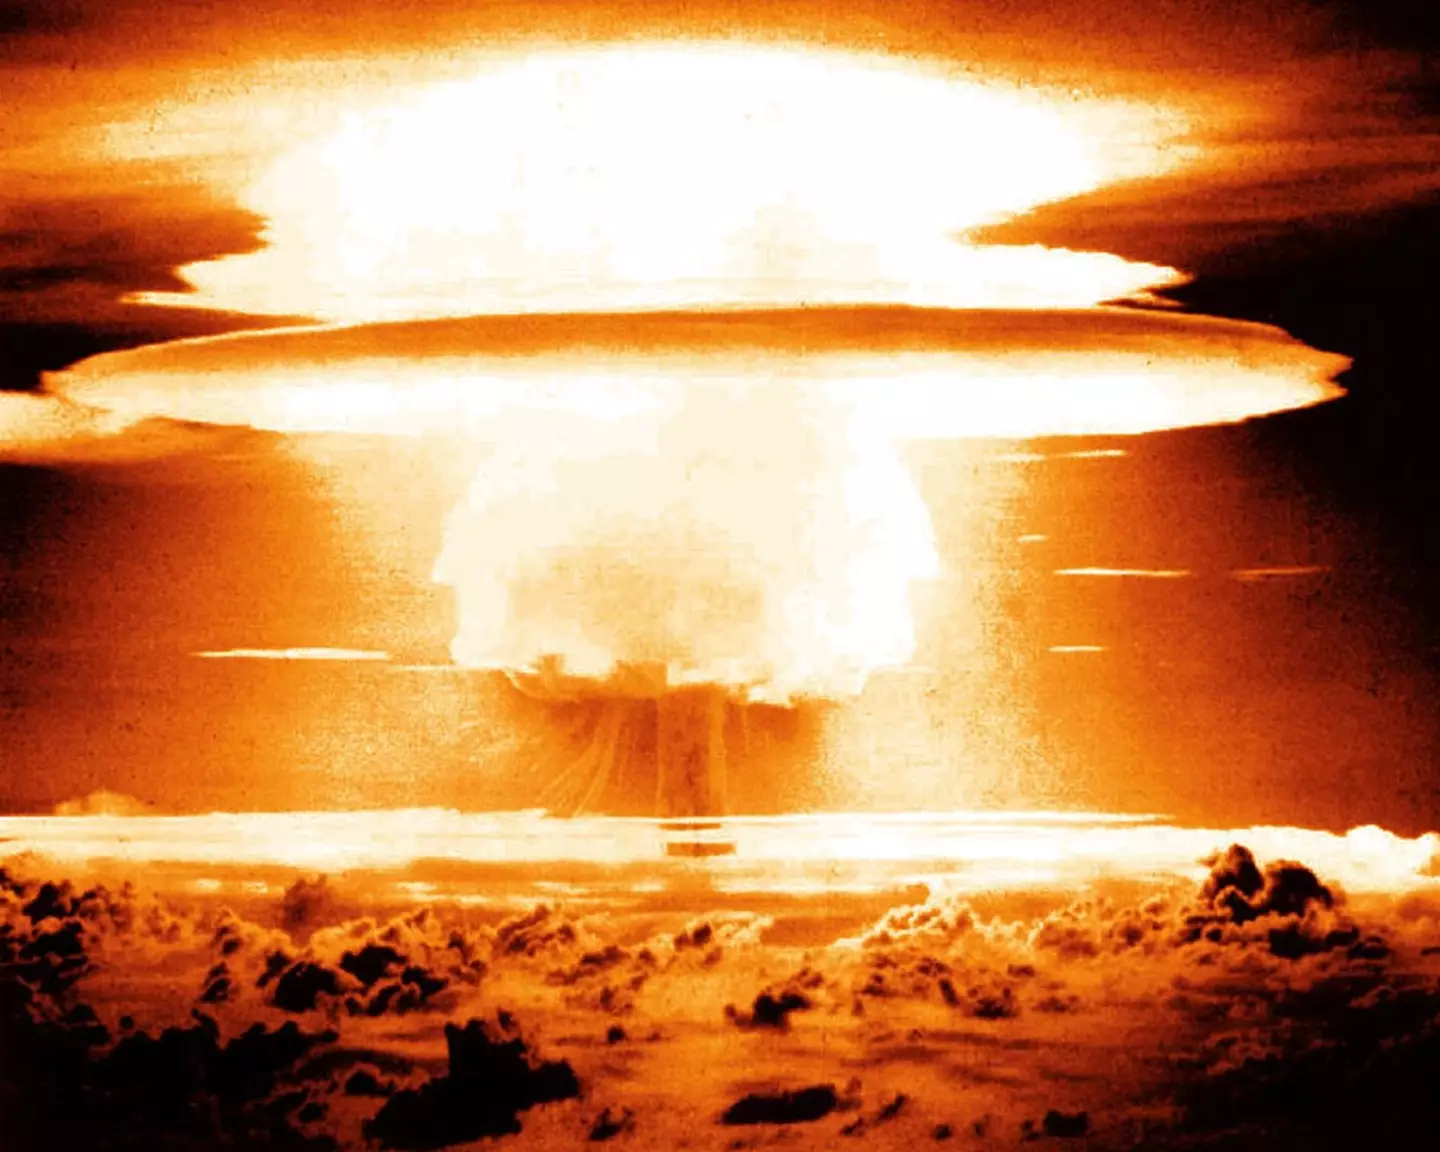 Within one second the fireball from the Castle Bravo explosion was 4.5 miles wide.